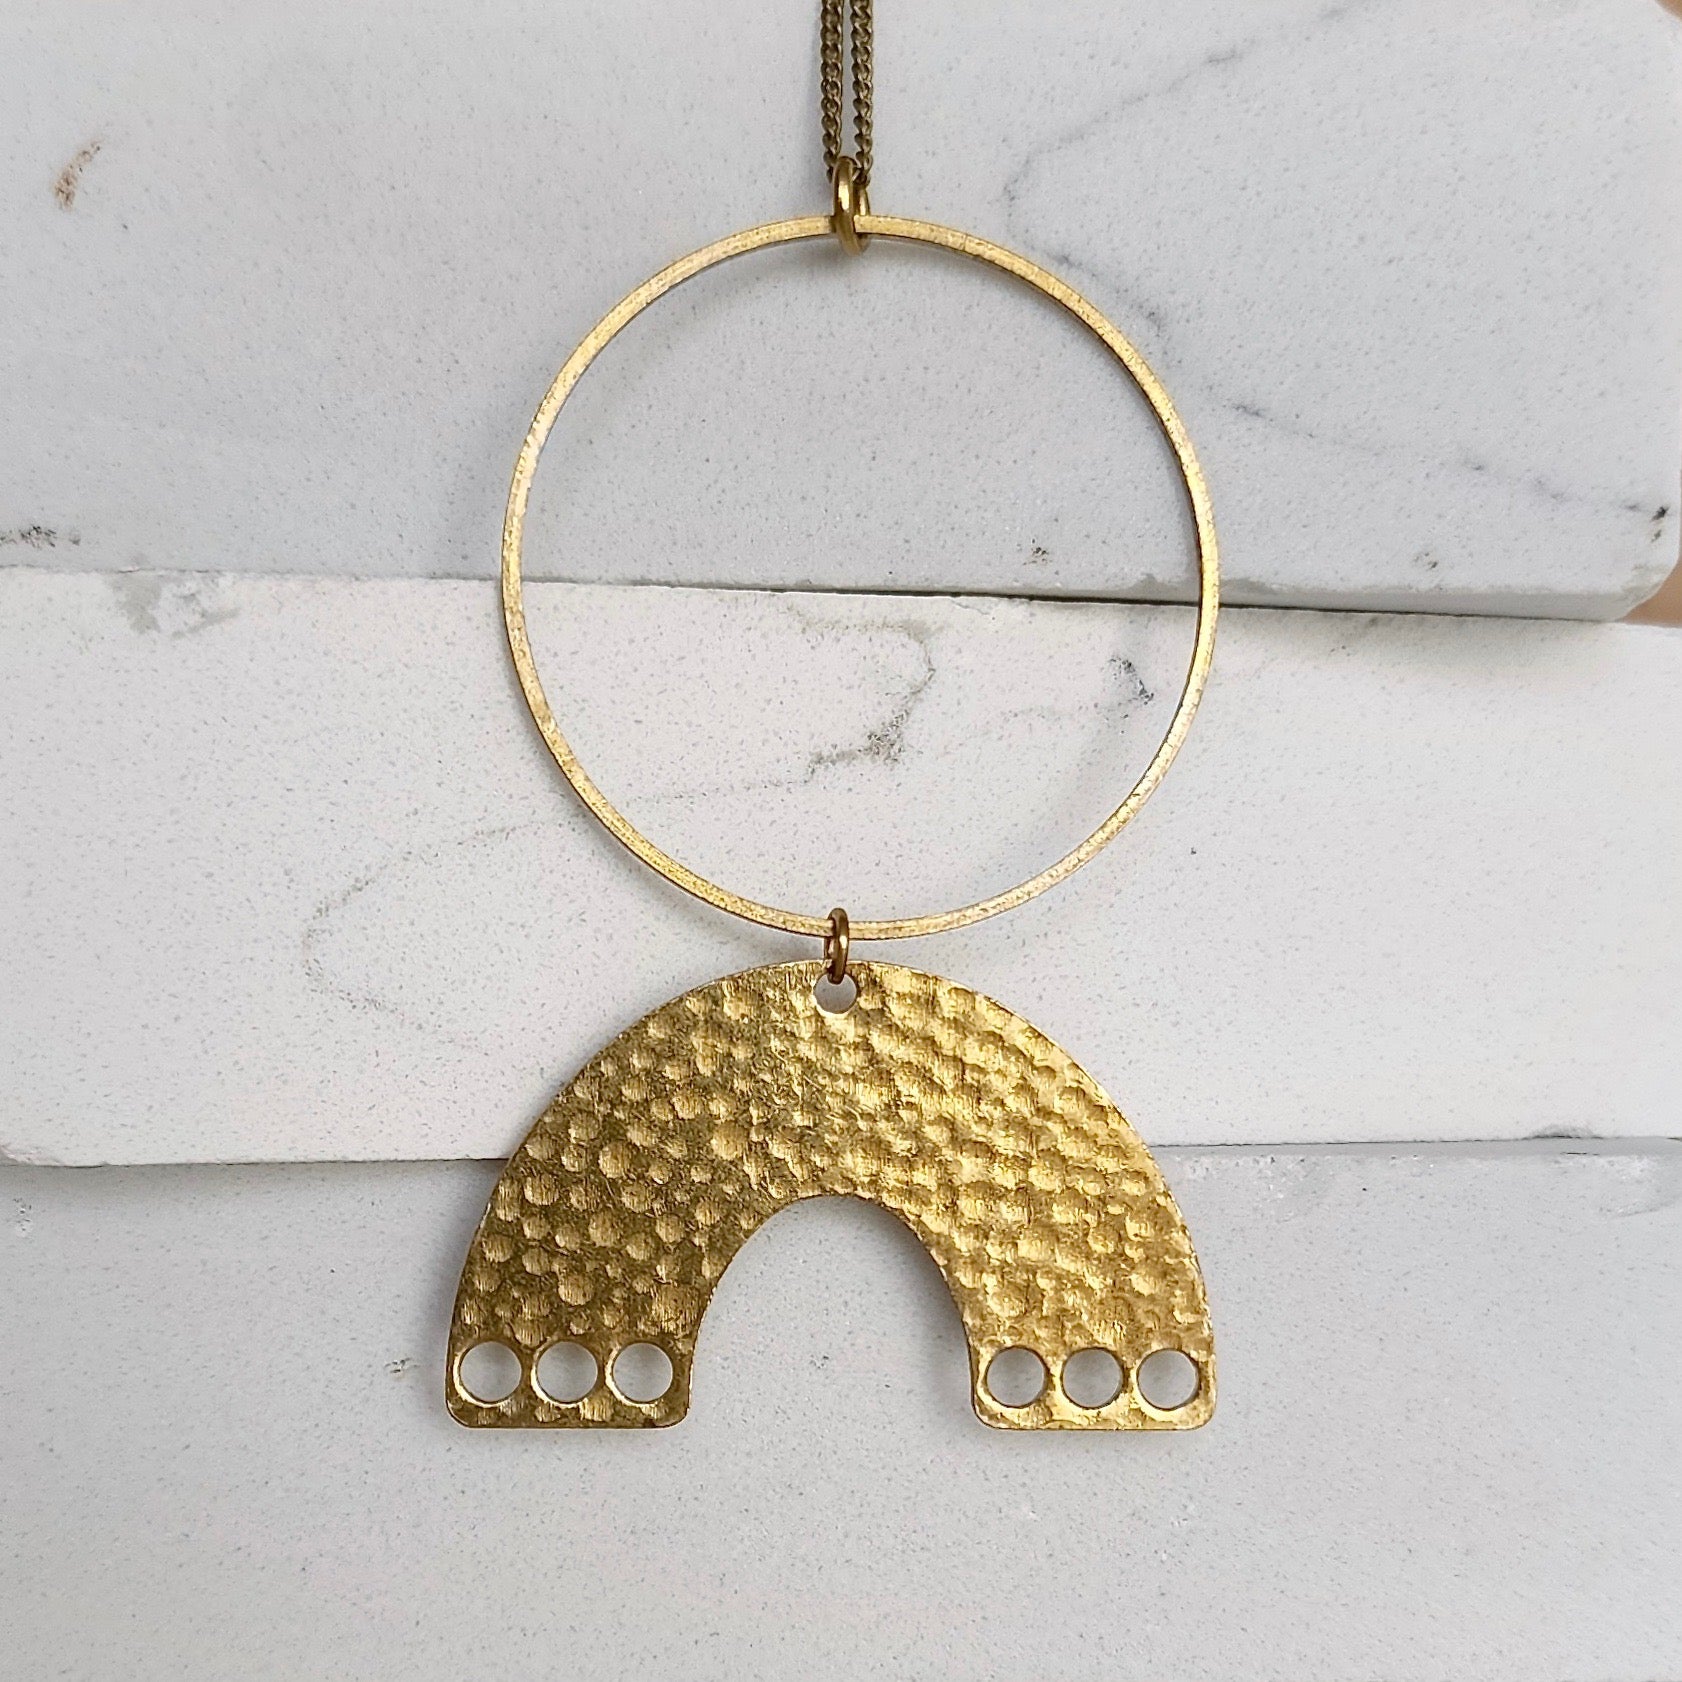 AWESOME ARCH NECKLACE